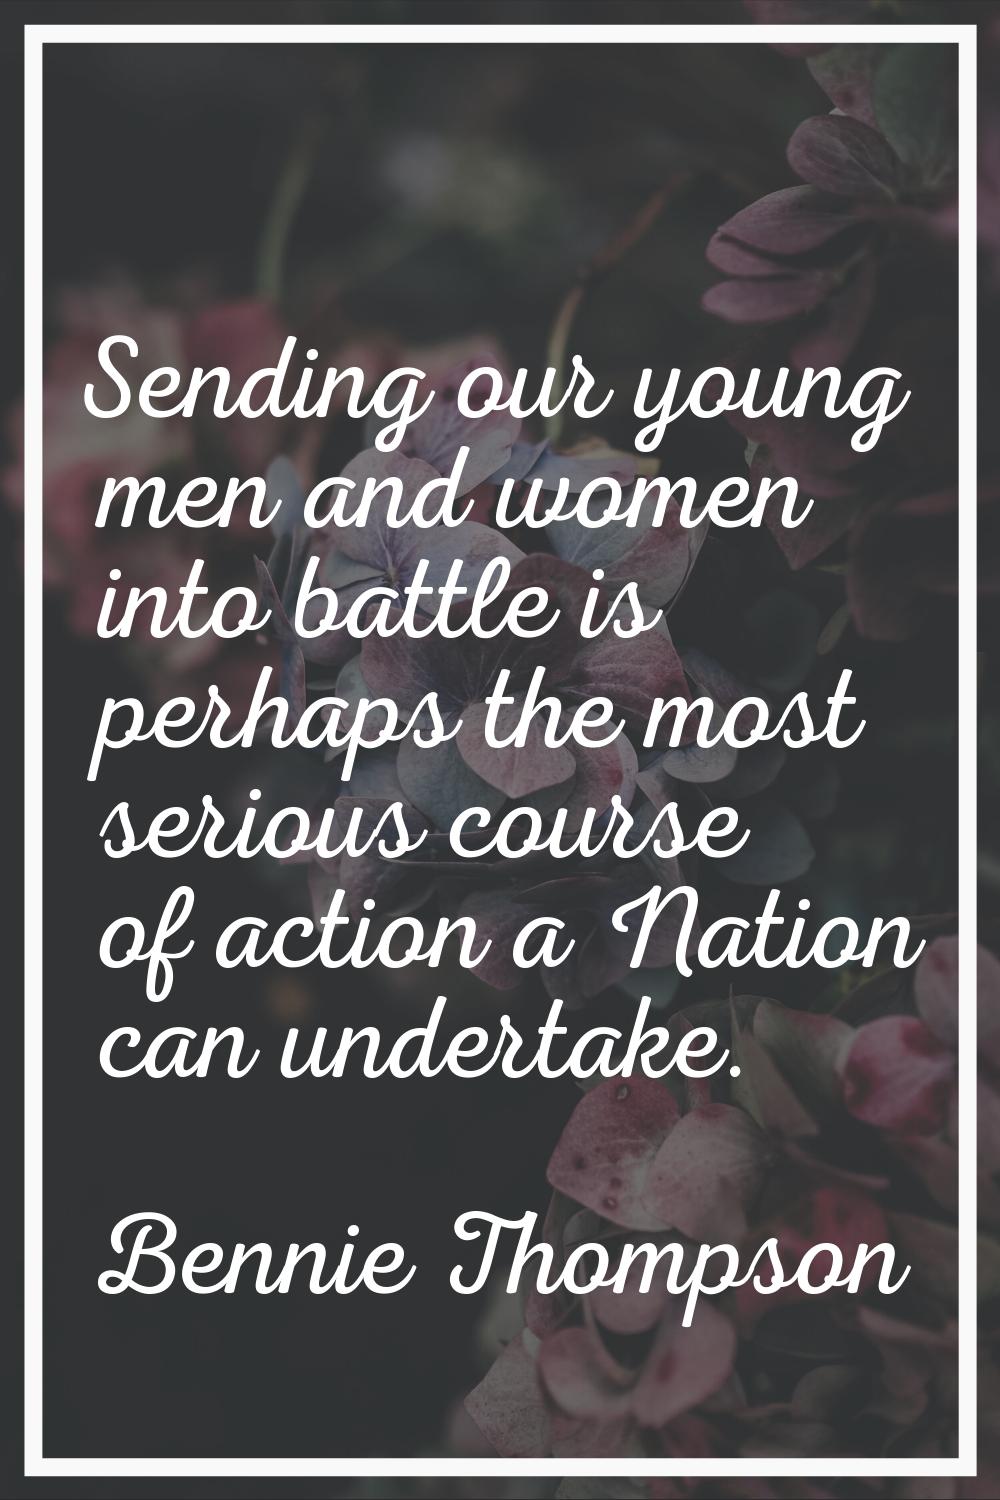 Sending our young men and women into battle is perhaps the most serious course of action a Nation c